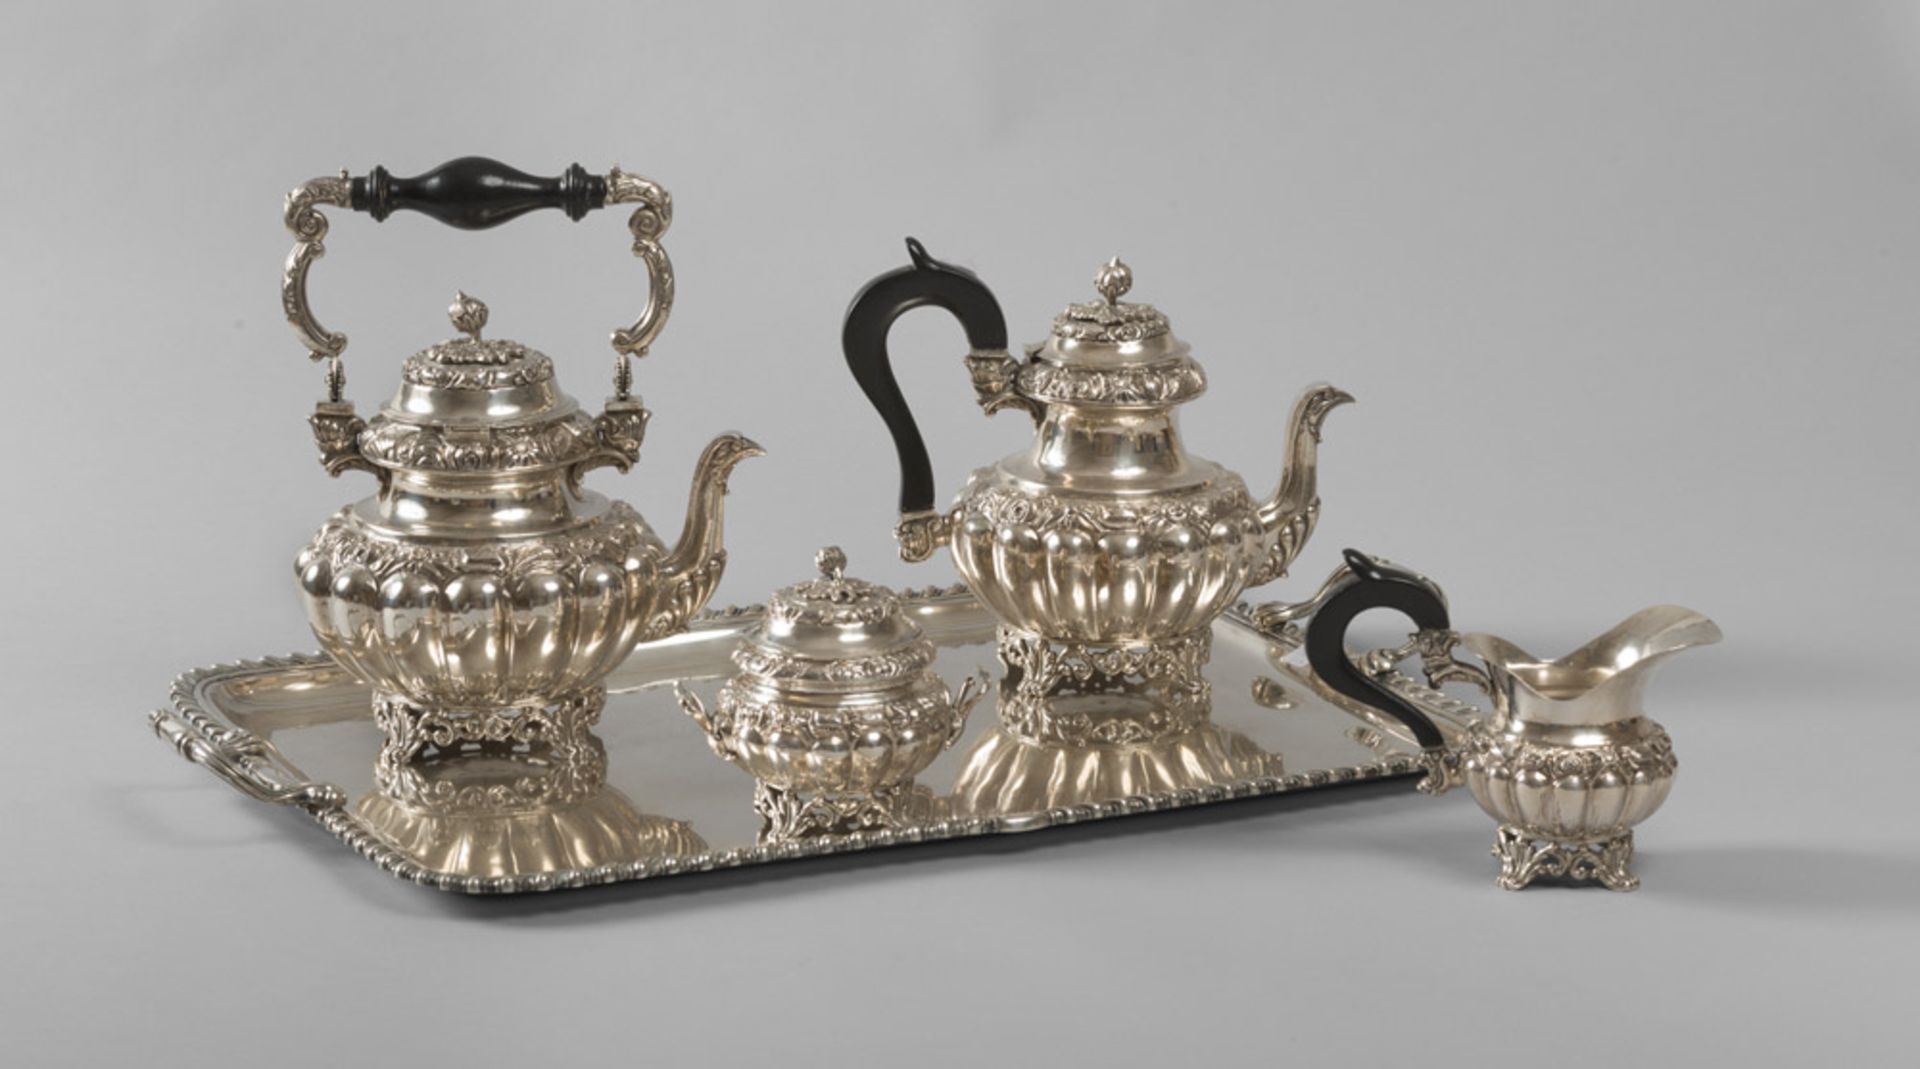 BEAUTIFUL SRVIZIO DA TEA IS COFFEE IN SILVER, PROBABLY NAPLES BEGINNING 20th CENTURY with body